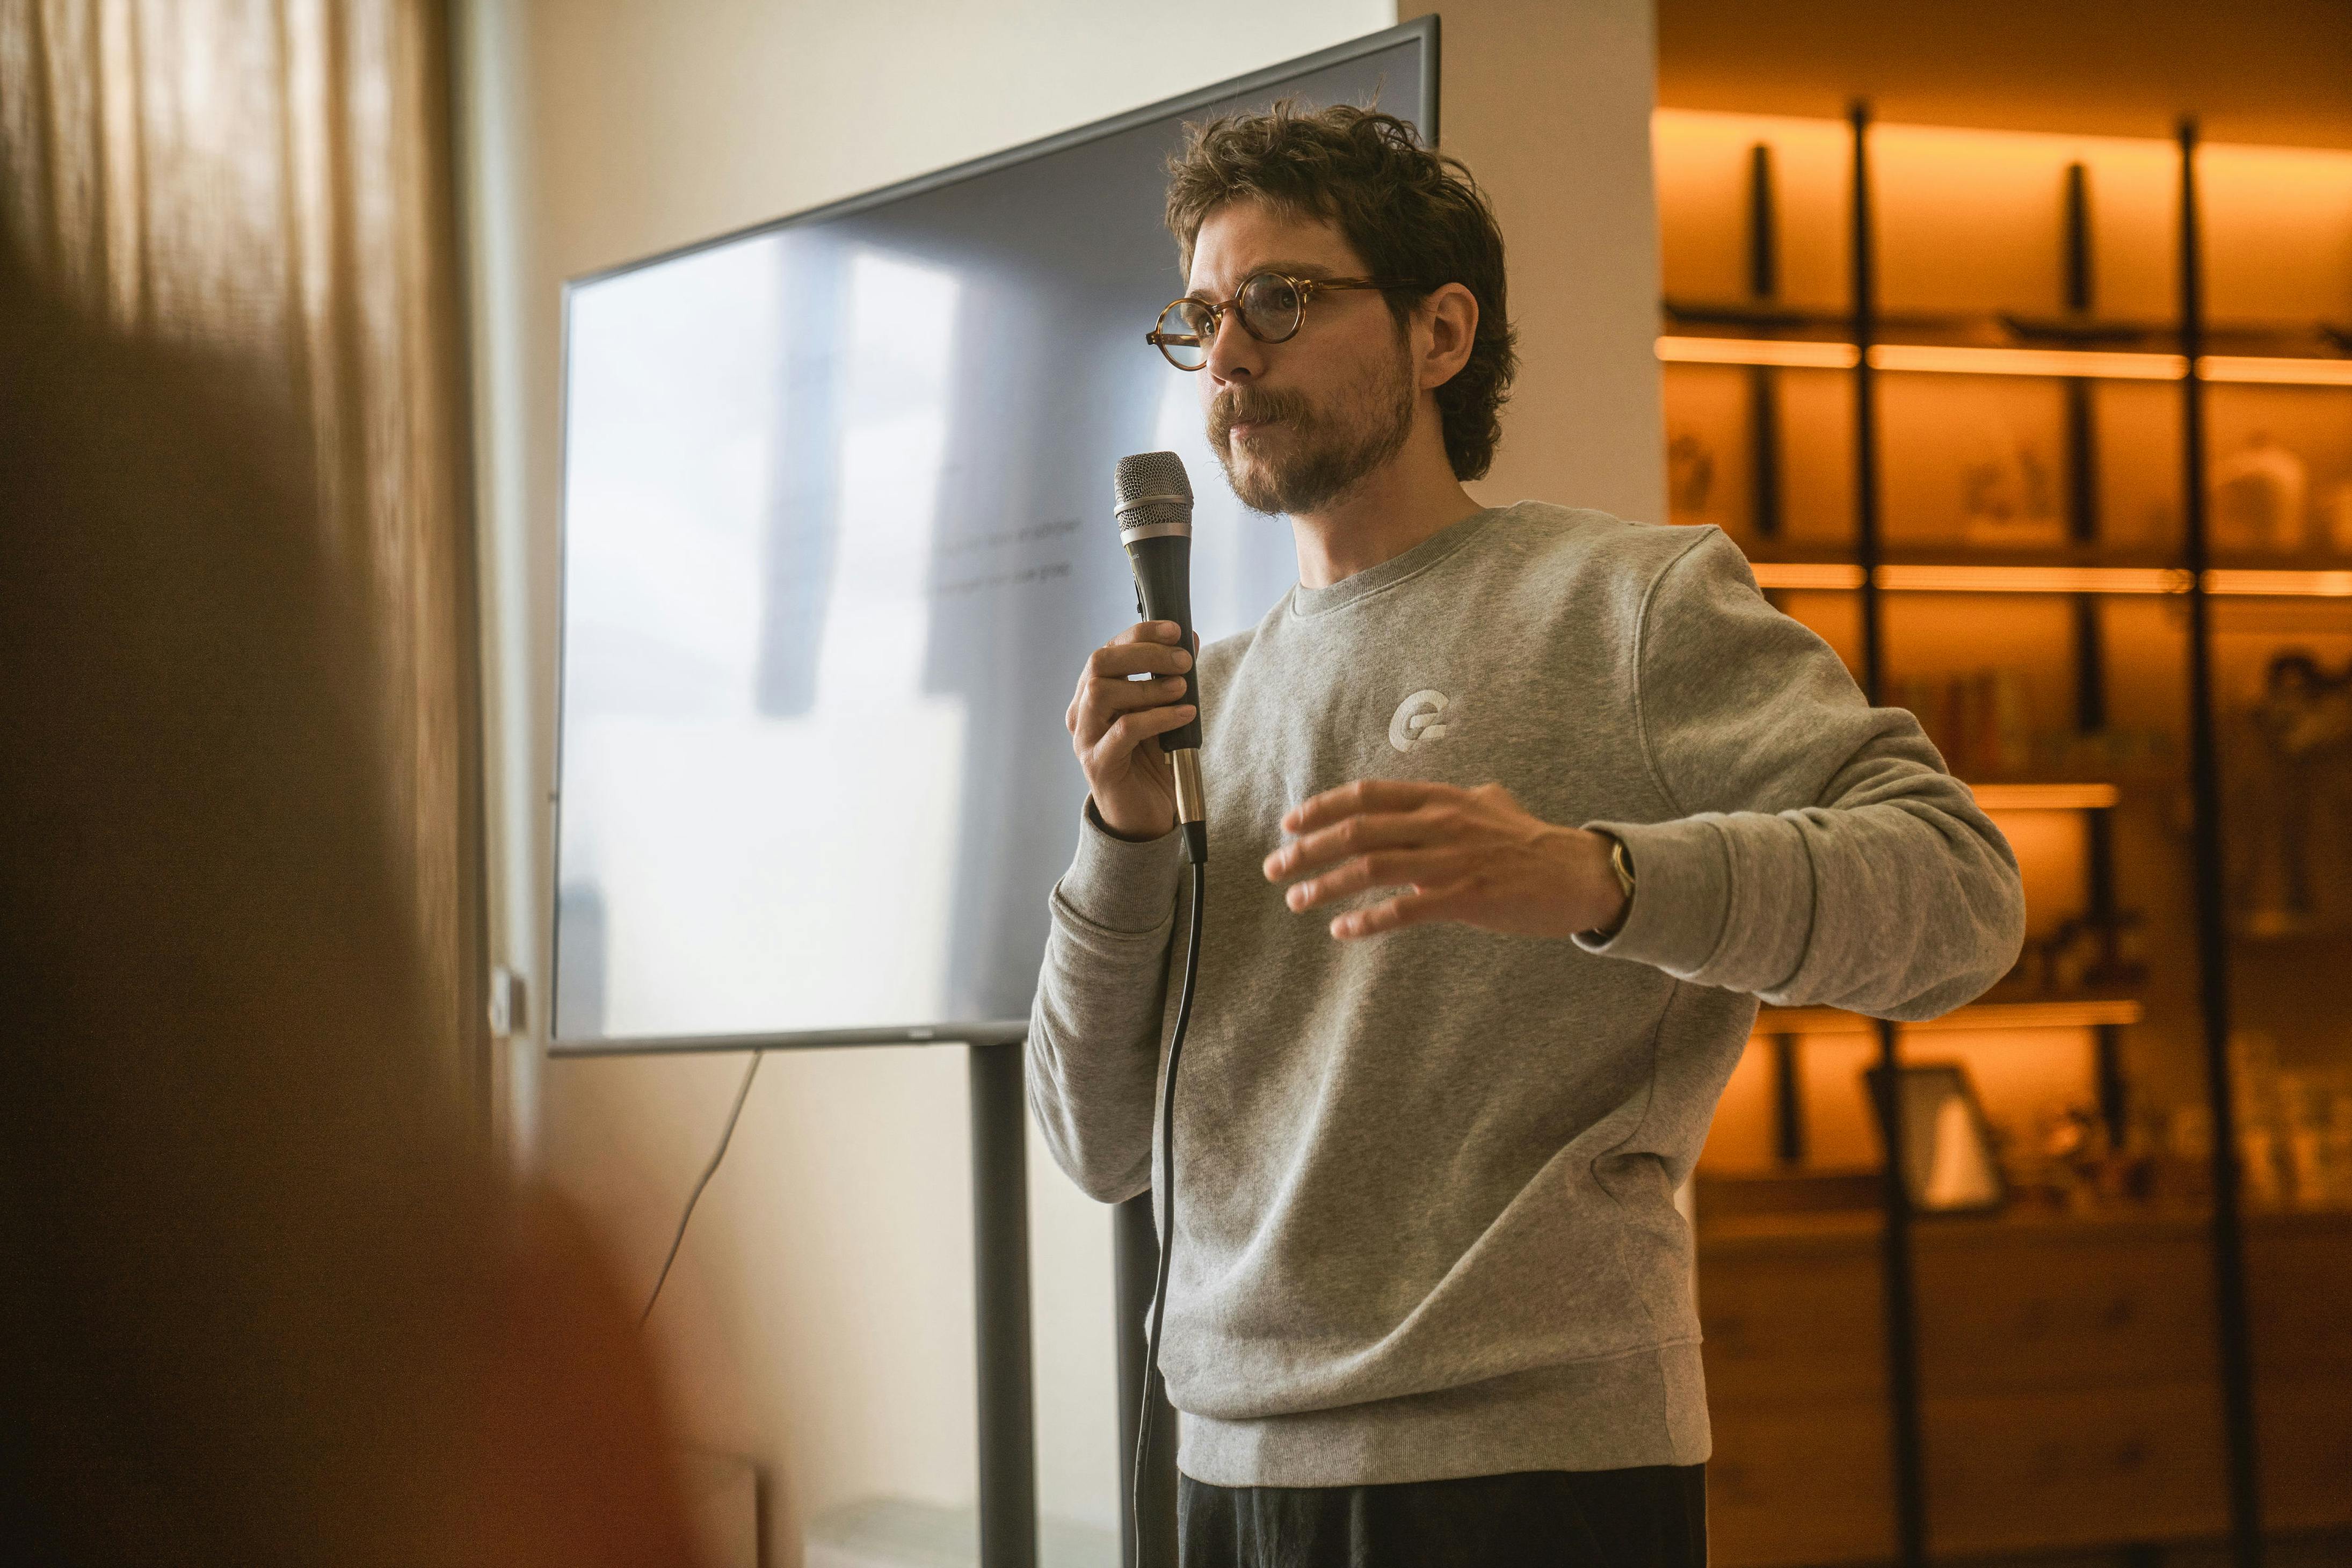 Man in a grey sweater holding a microphone explaining something with a big tv screen in the back.